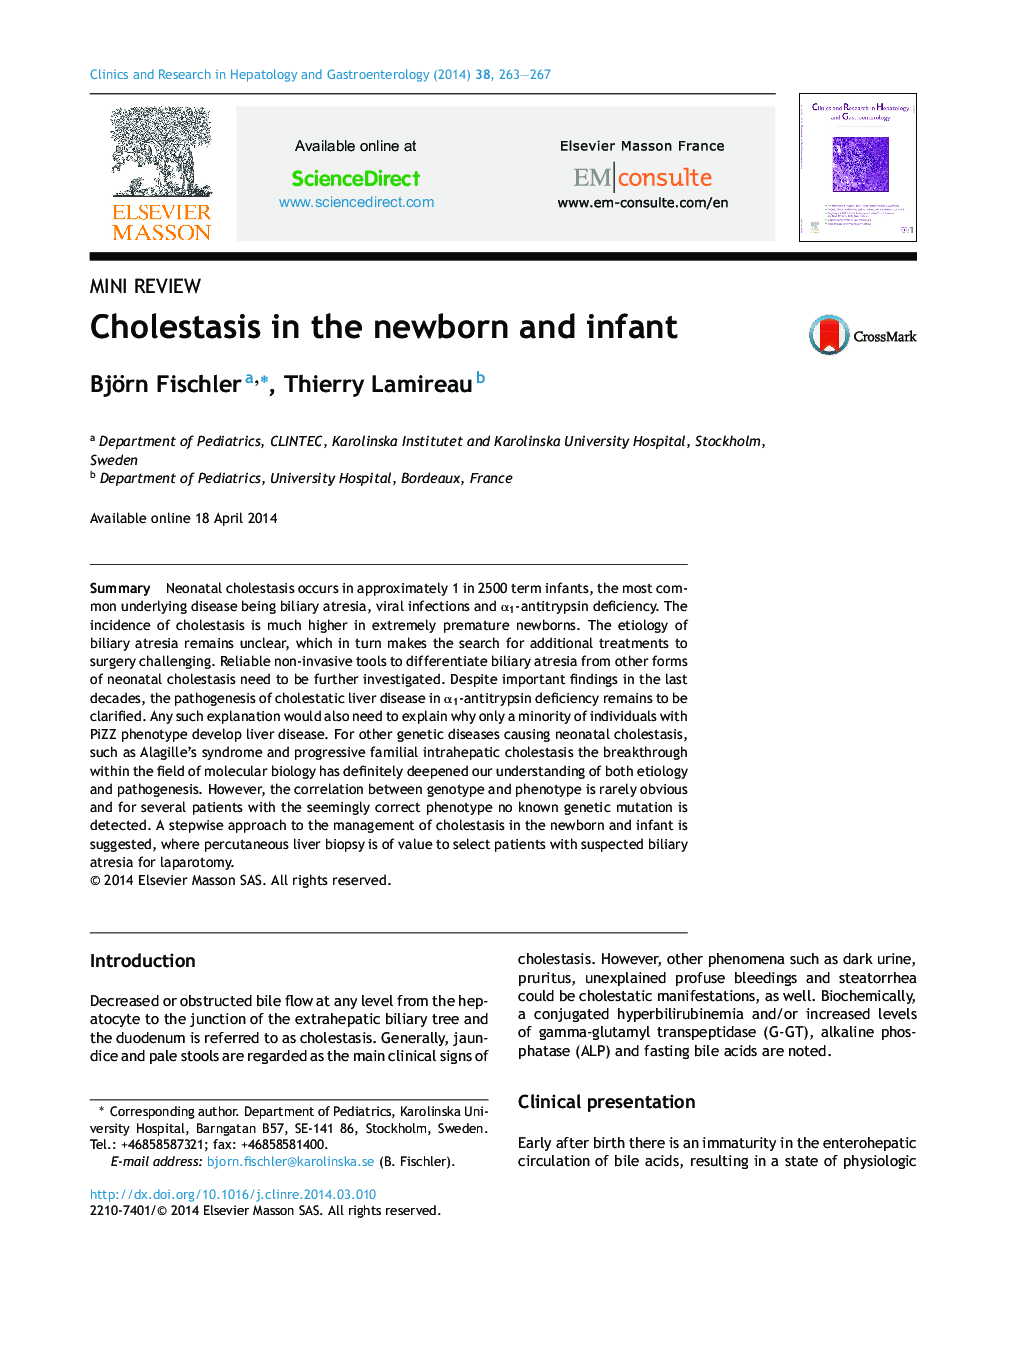 Cholestasis in the newborn and infant